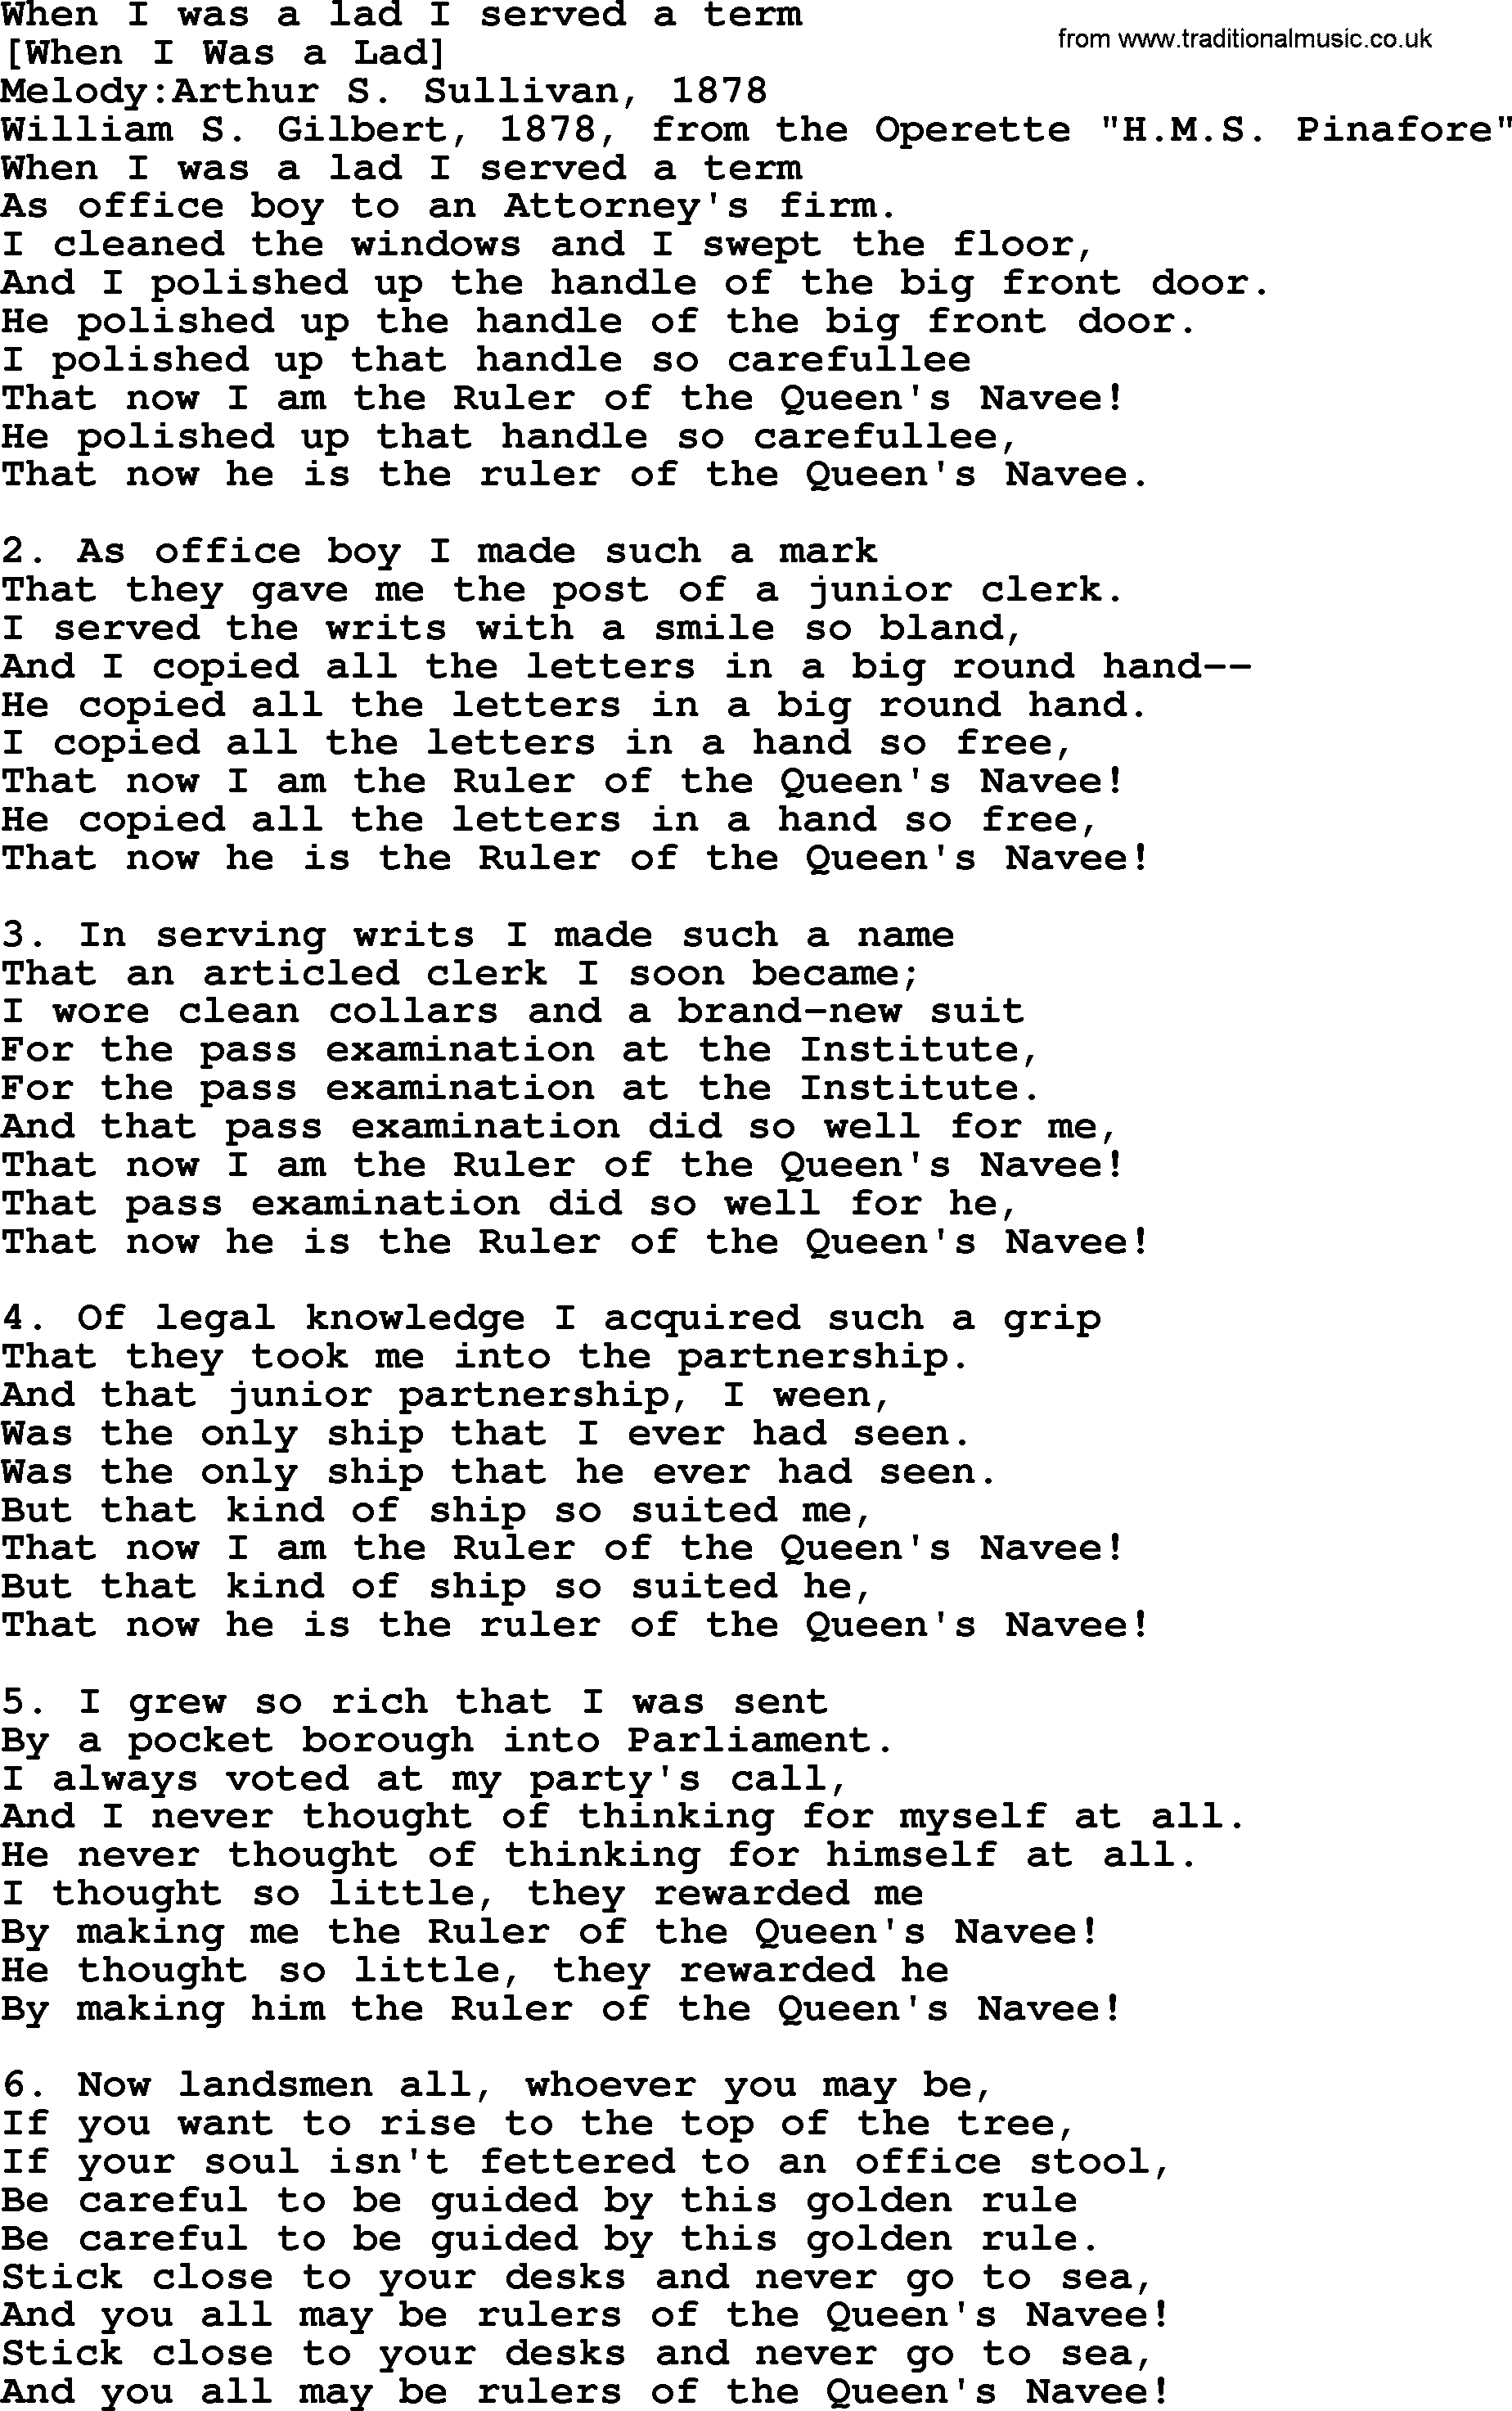 Old English Song: When I Was A Lad I Served A Term lyrics